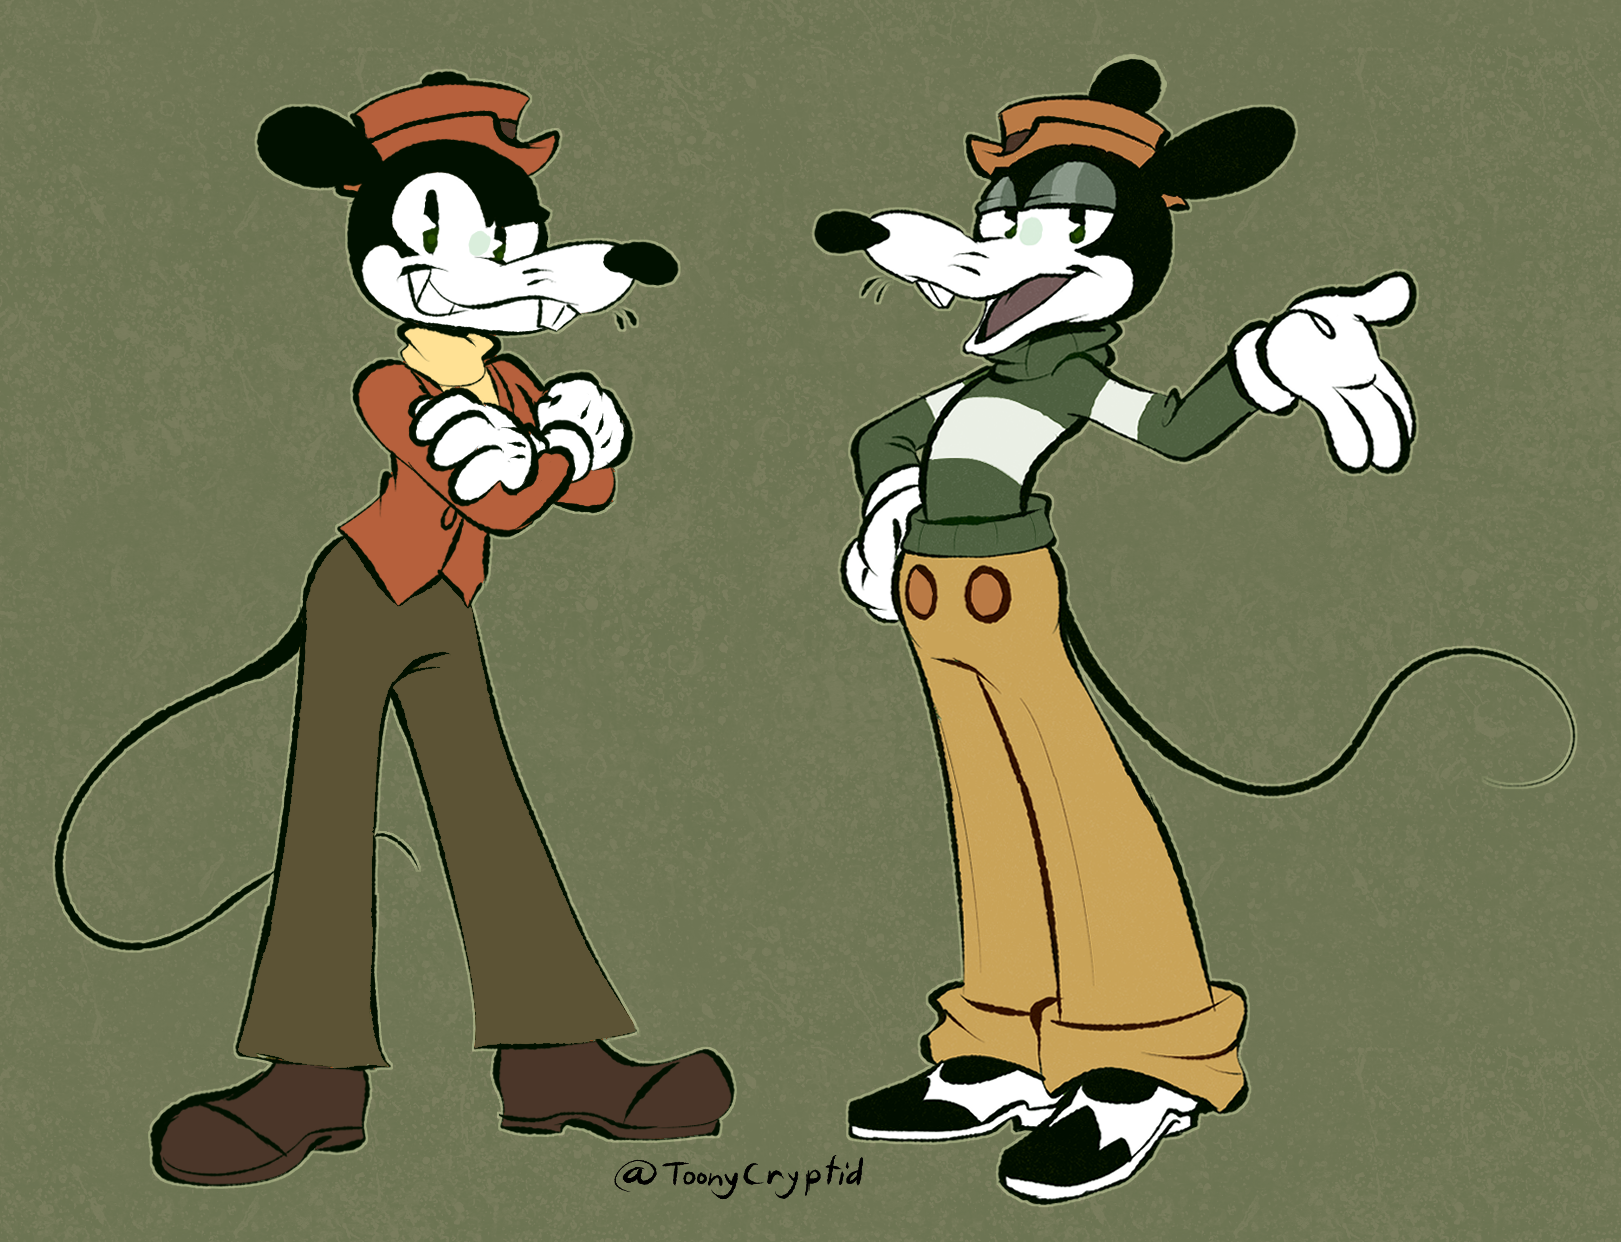 Mortimer Mouse by ToonyCryptid on DeviantArt